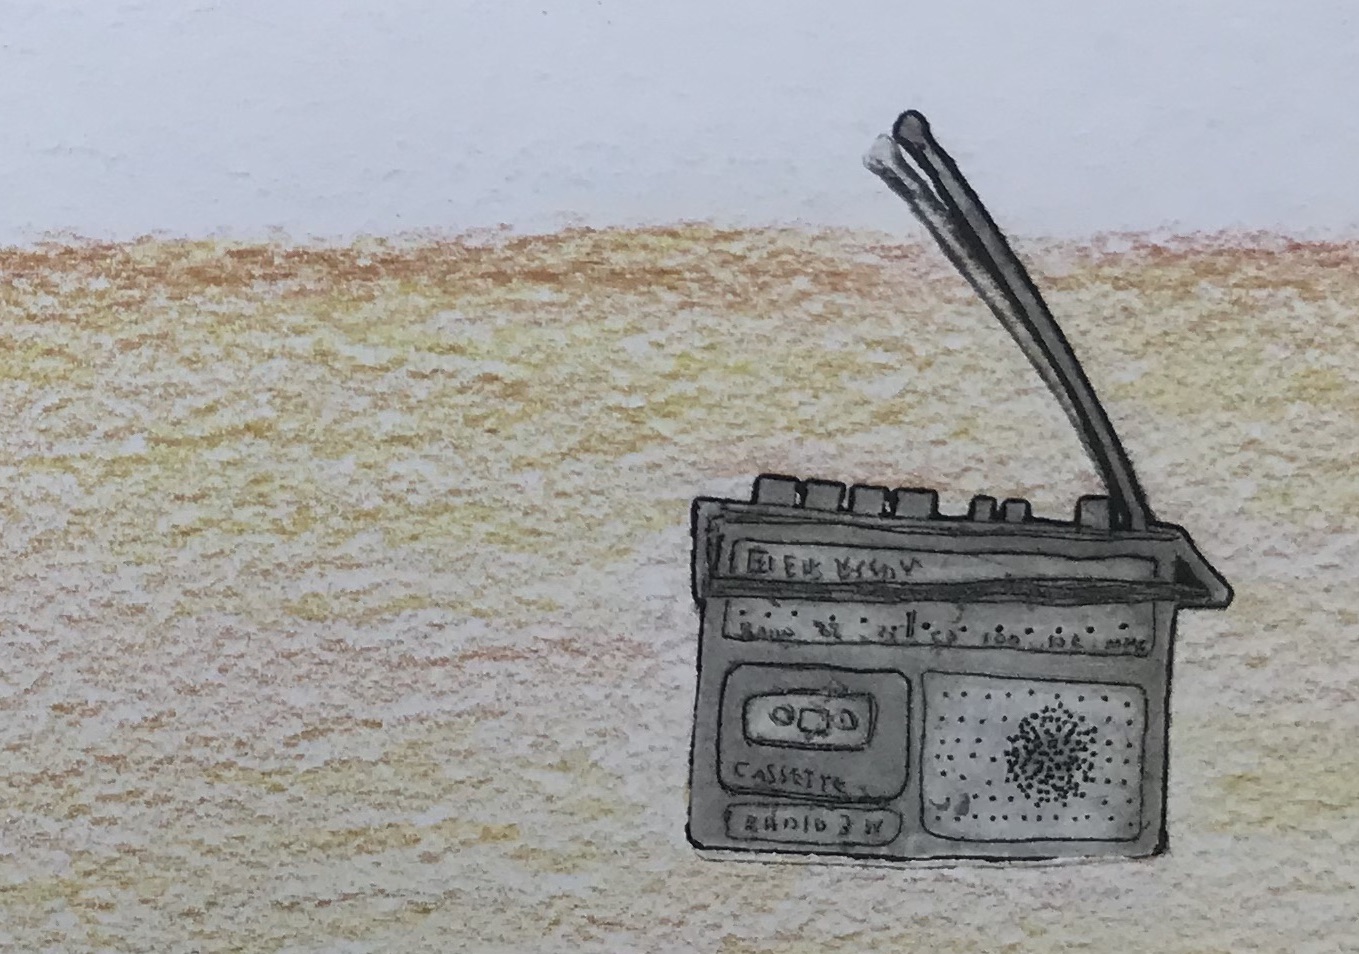 A print of 1980s radio with a tape deck and it's aerial sticking up, sitting on red earth.